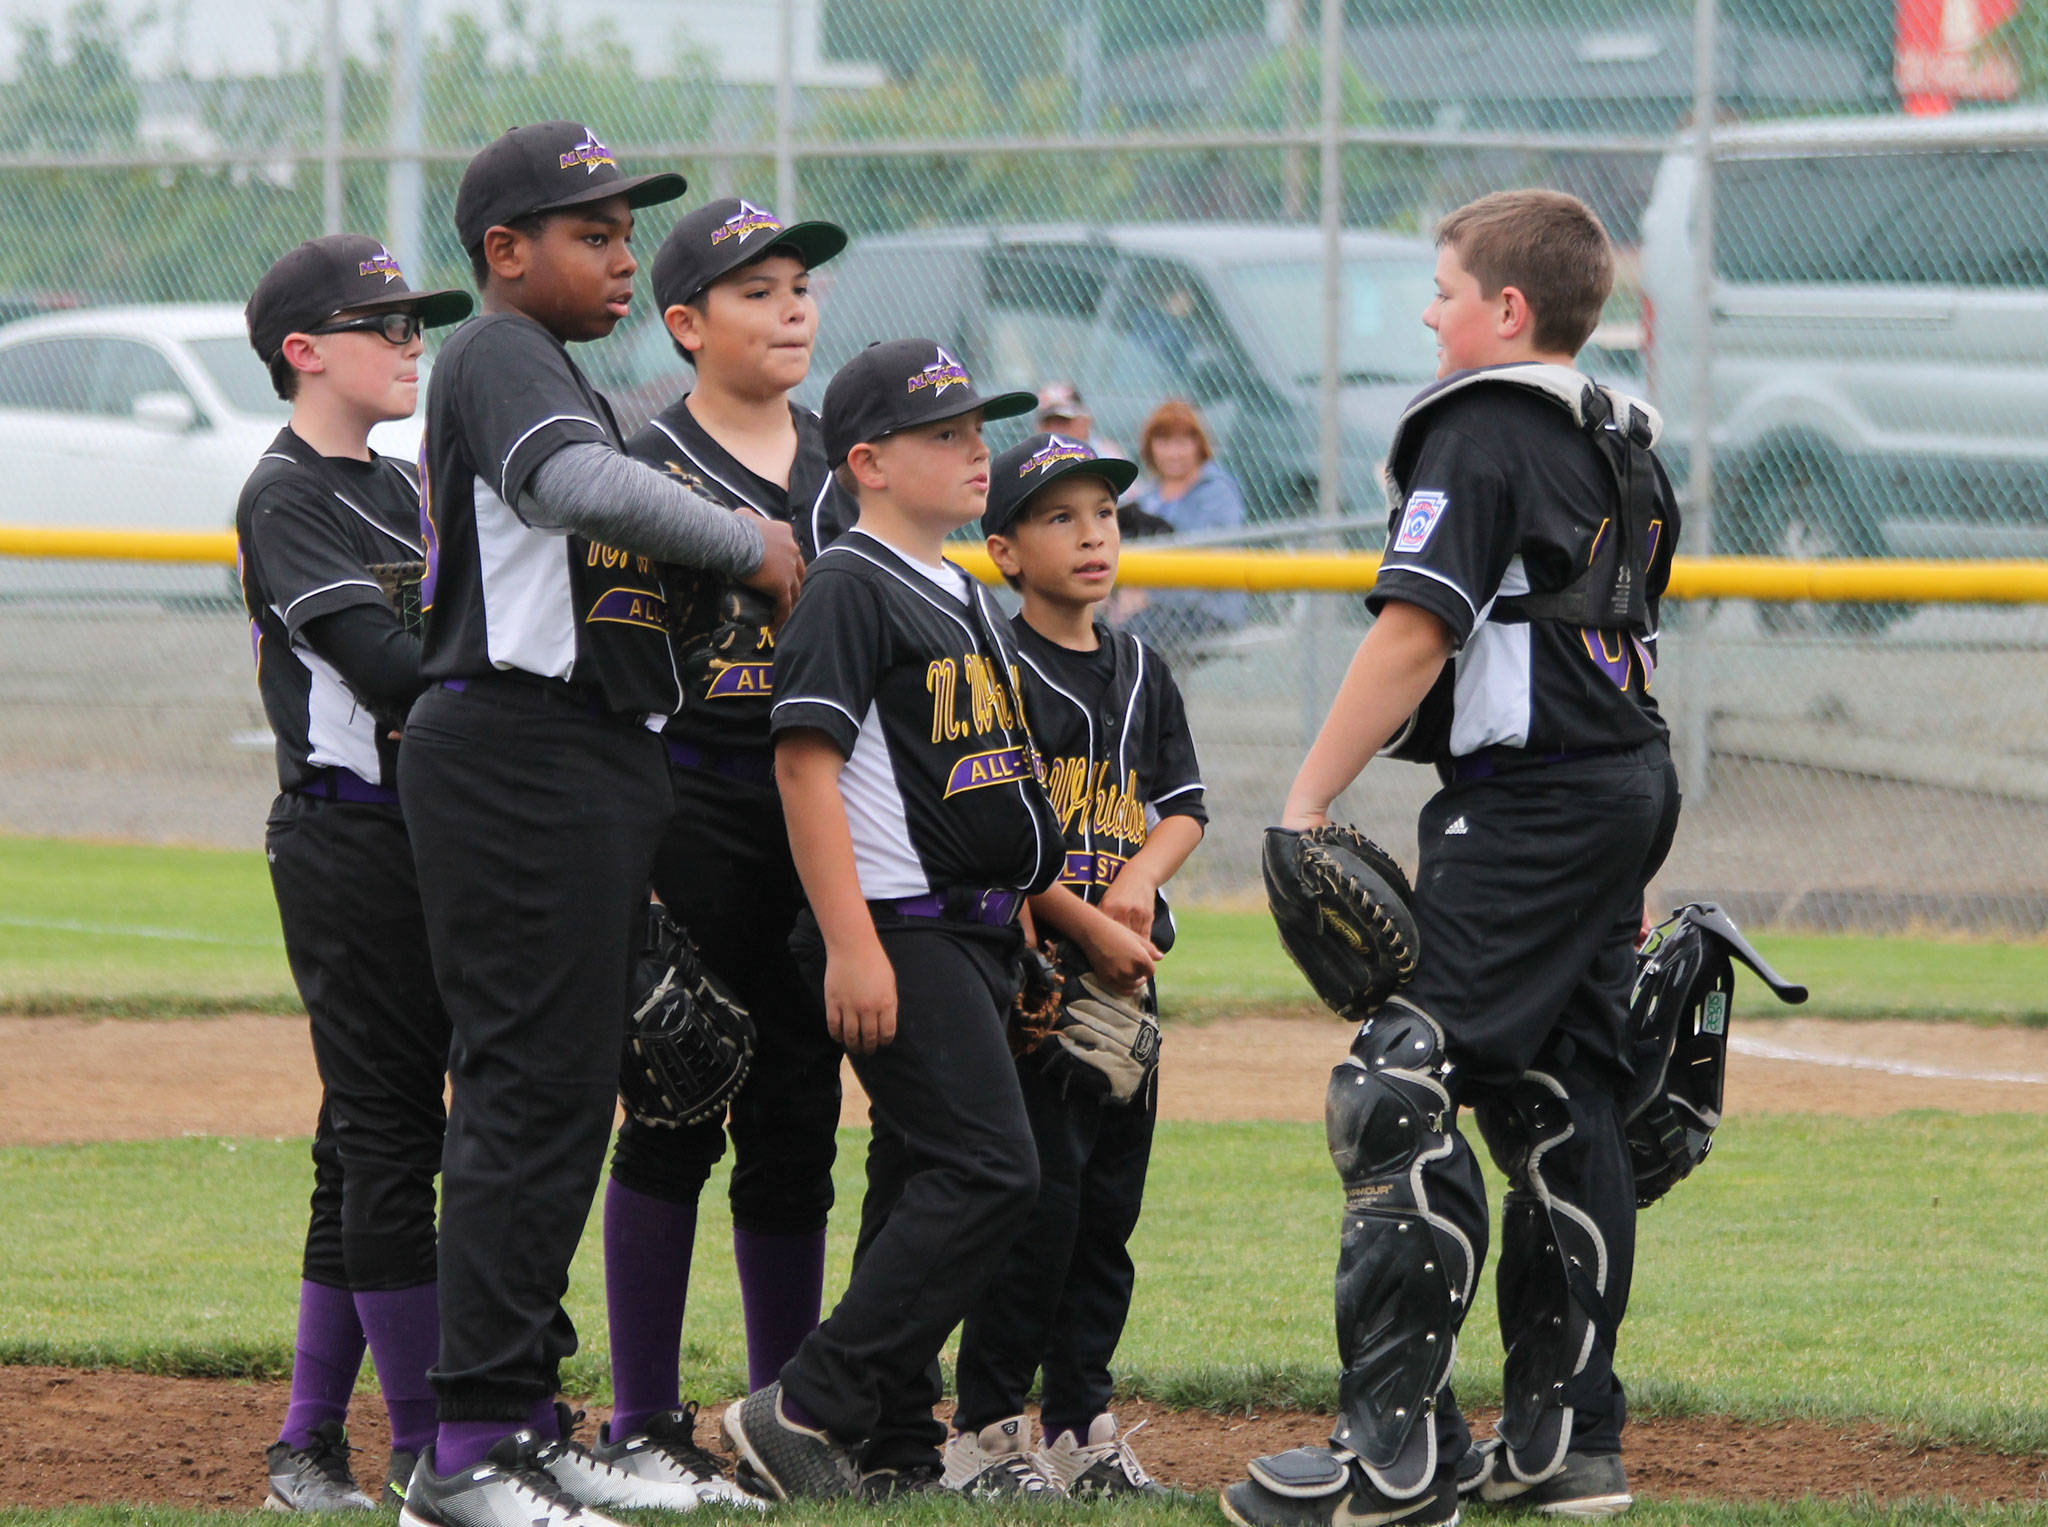 North Whidbey meets at the m0und during a break in the action. From the left are Coop Cooper, Daniel Richey, Nikko Gonzales, Easton Burton, Gaven Gemmell and Meyer Brayden.(Photo by Jim Waller/Whidbey News-Times)